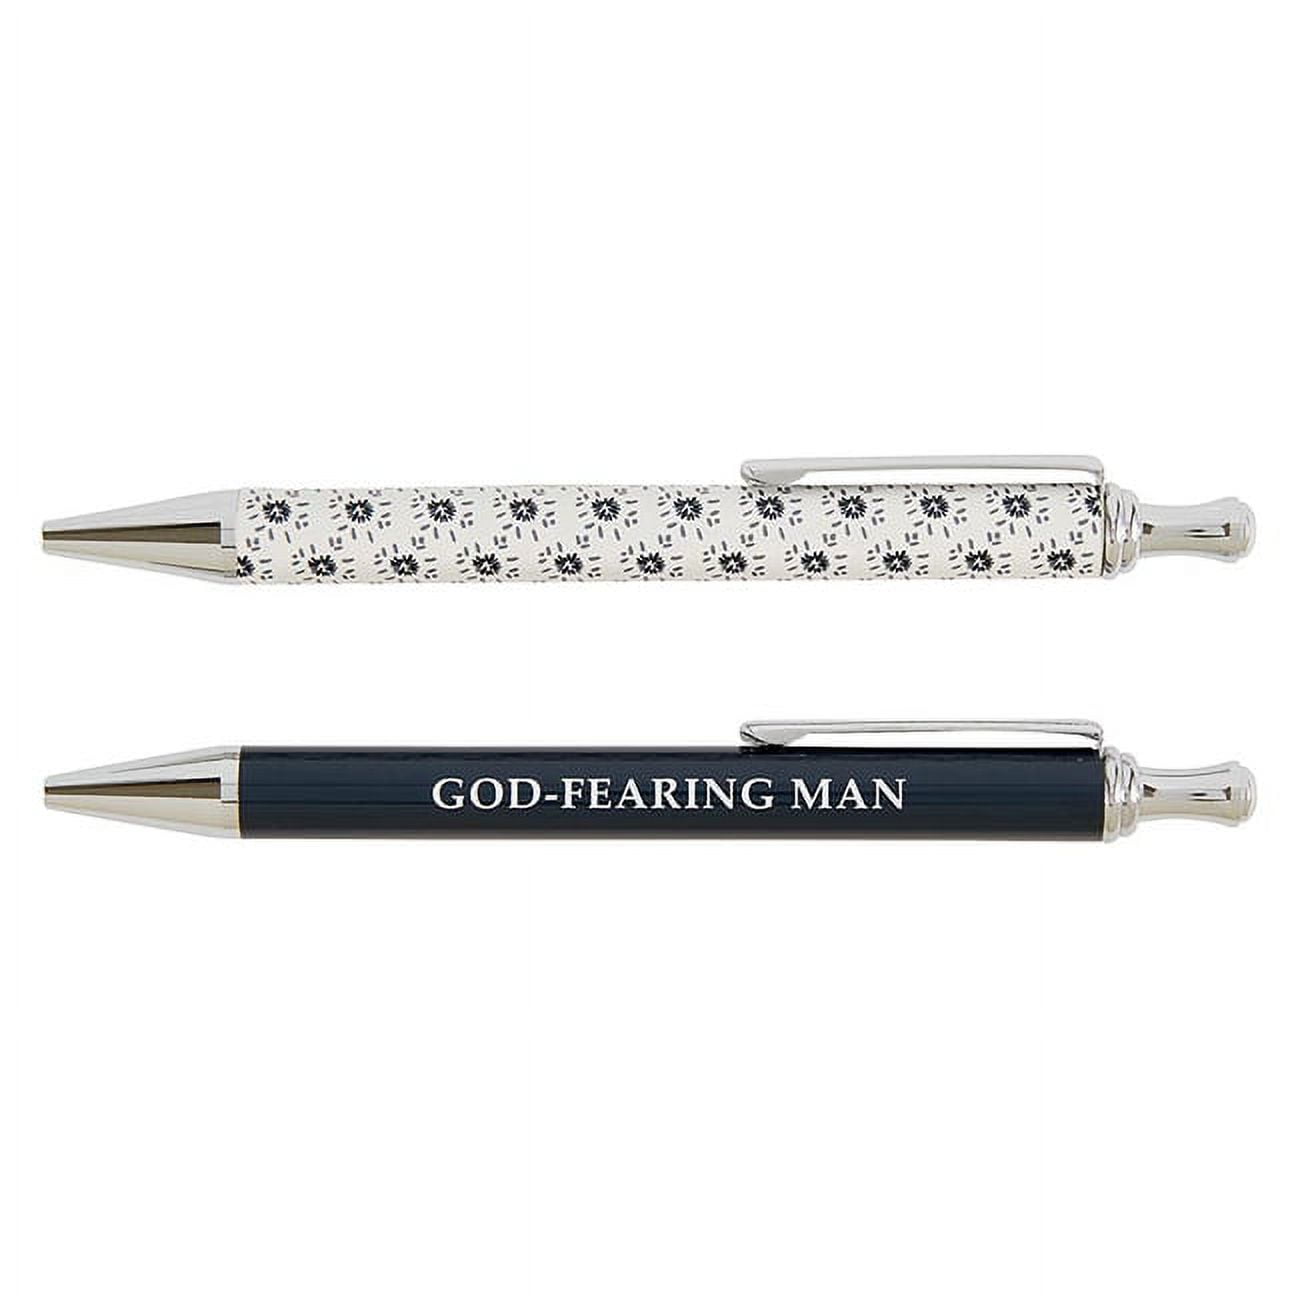 Picture of CB Gift 221748 God-Fearing Man Pen Set, Set of 2